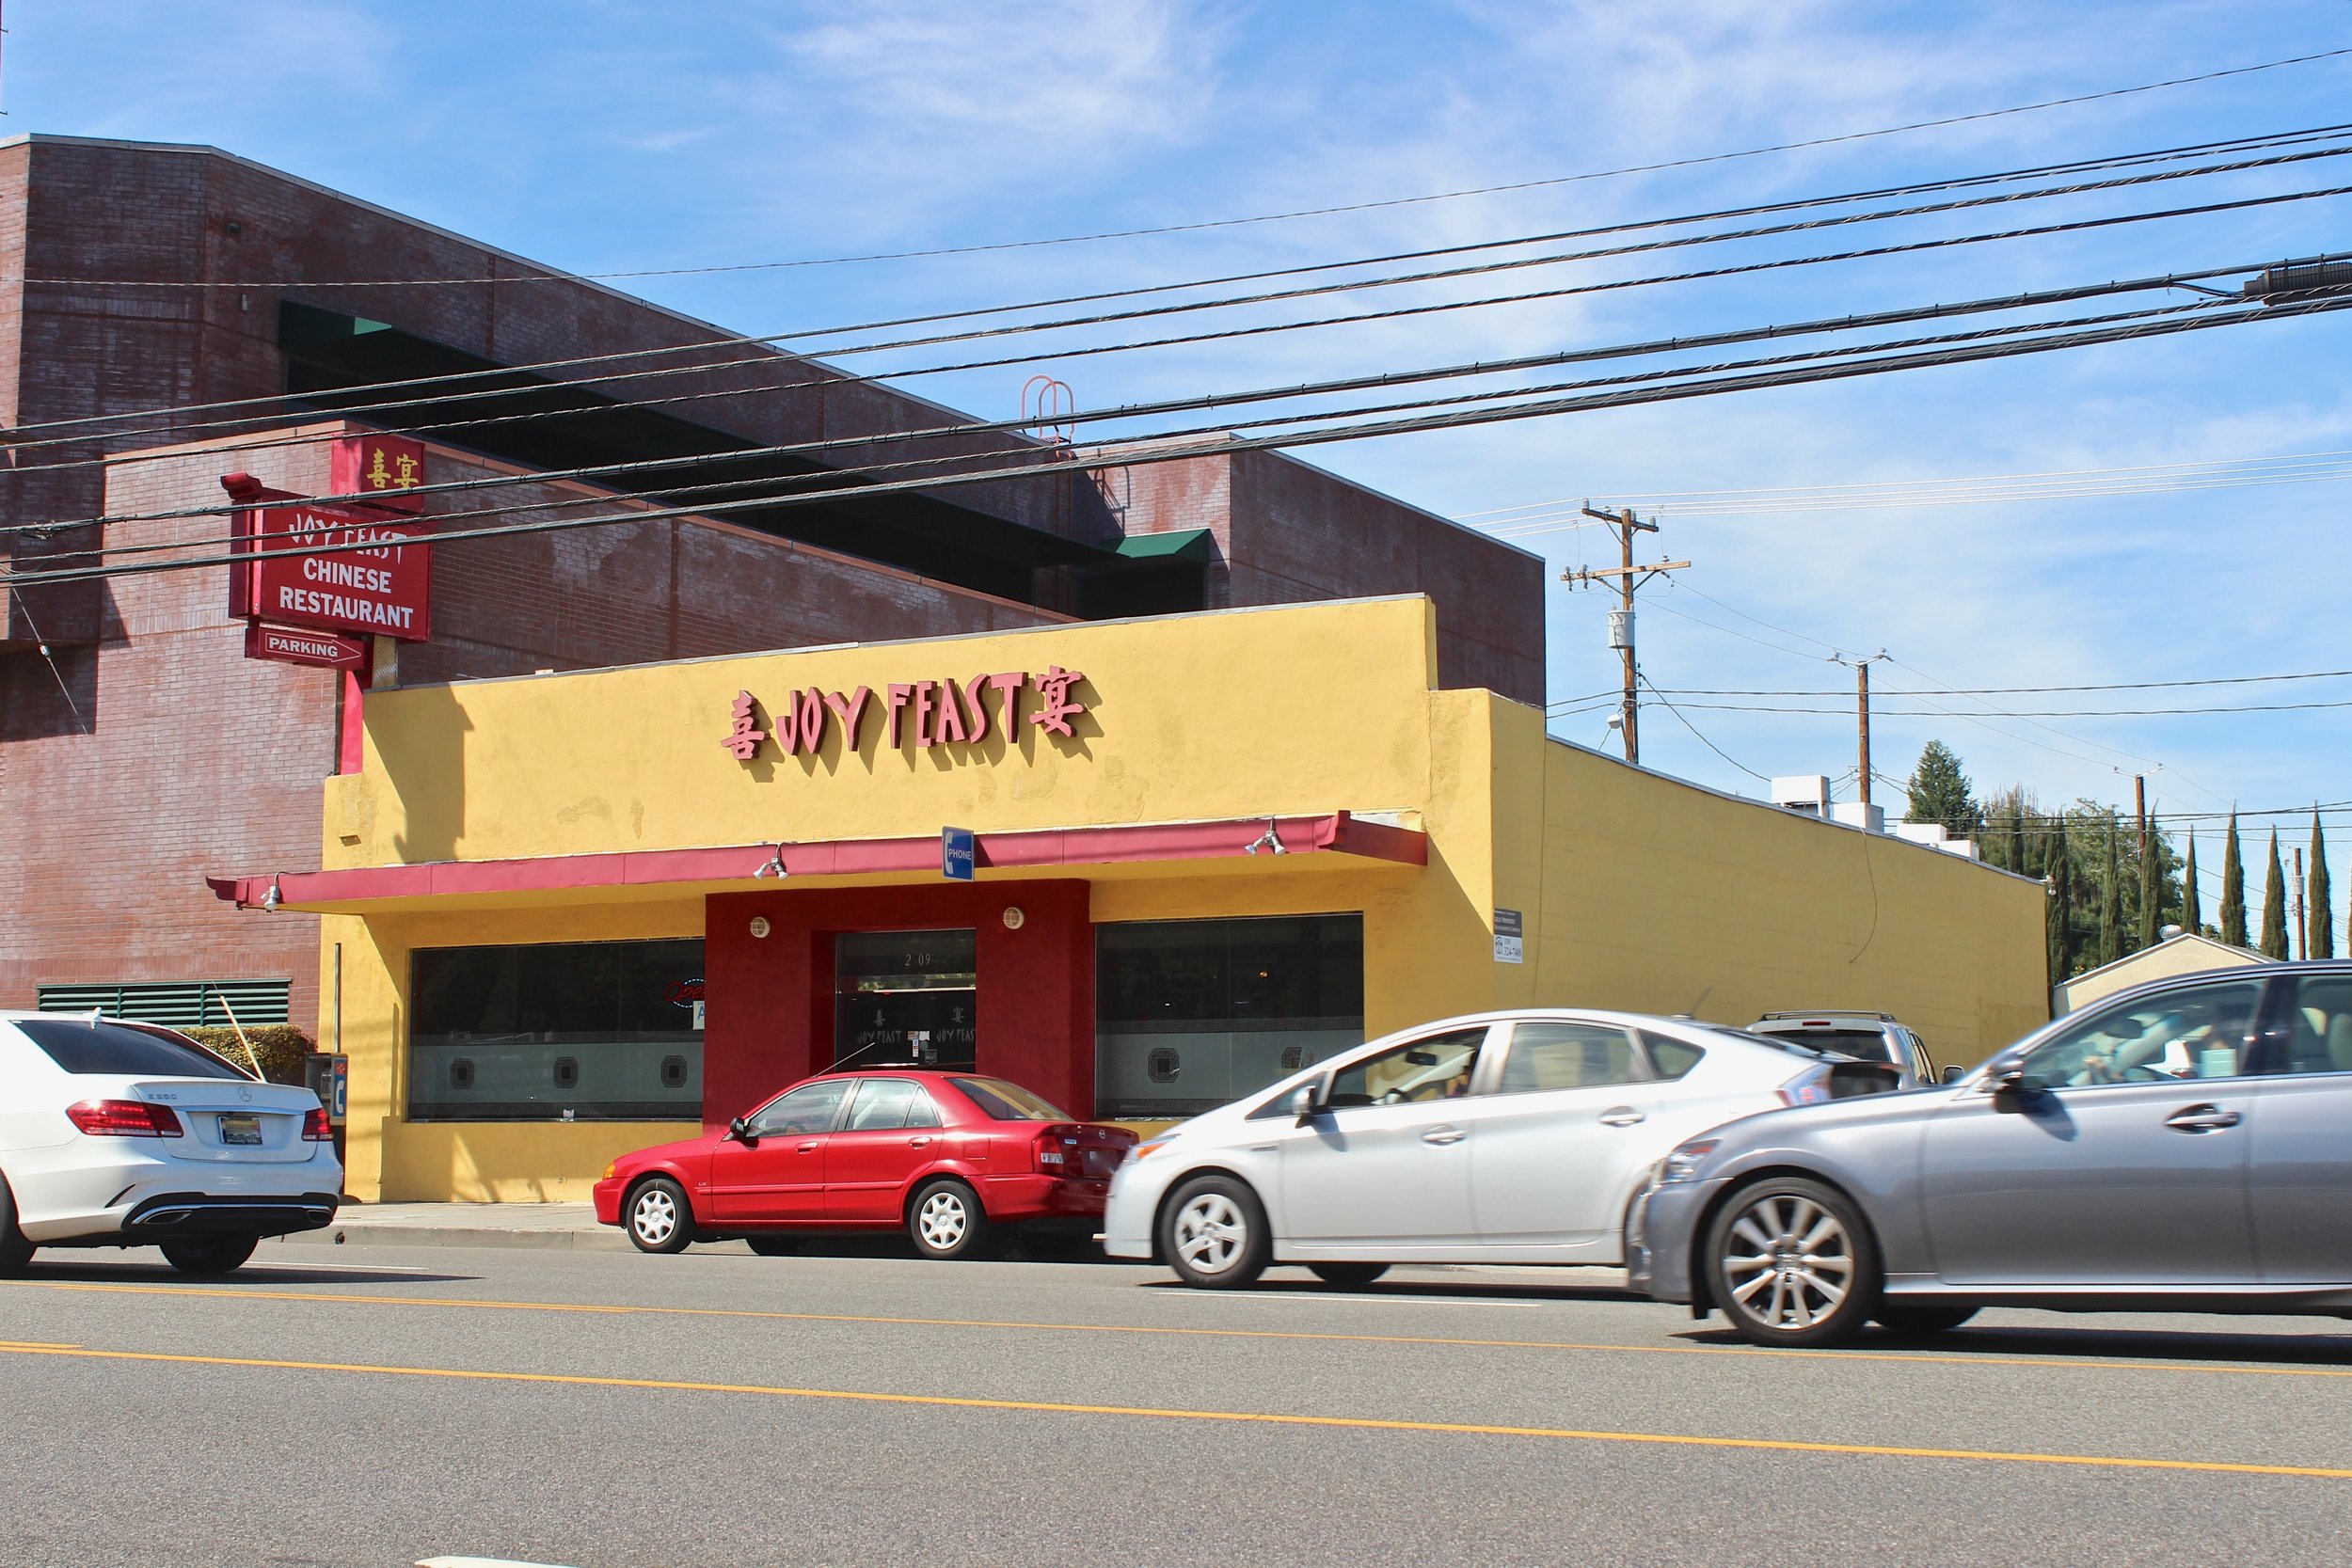 Street view of yellow building with Joy Feast sign in red lettering.